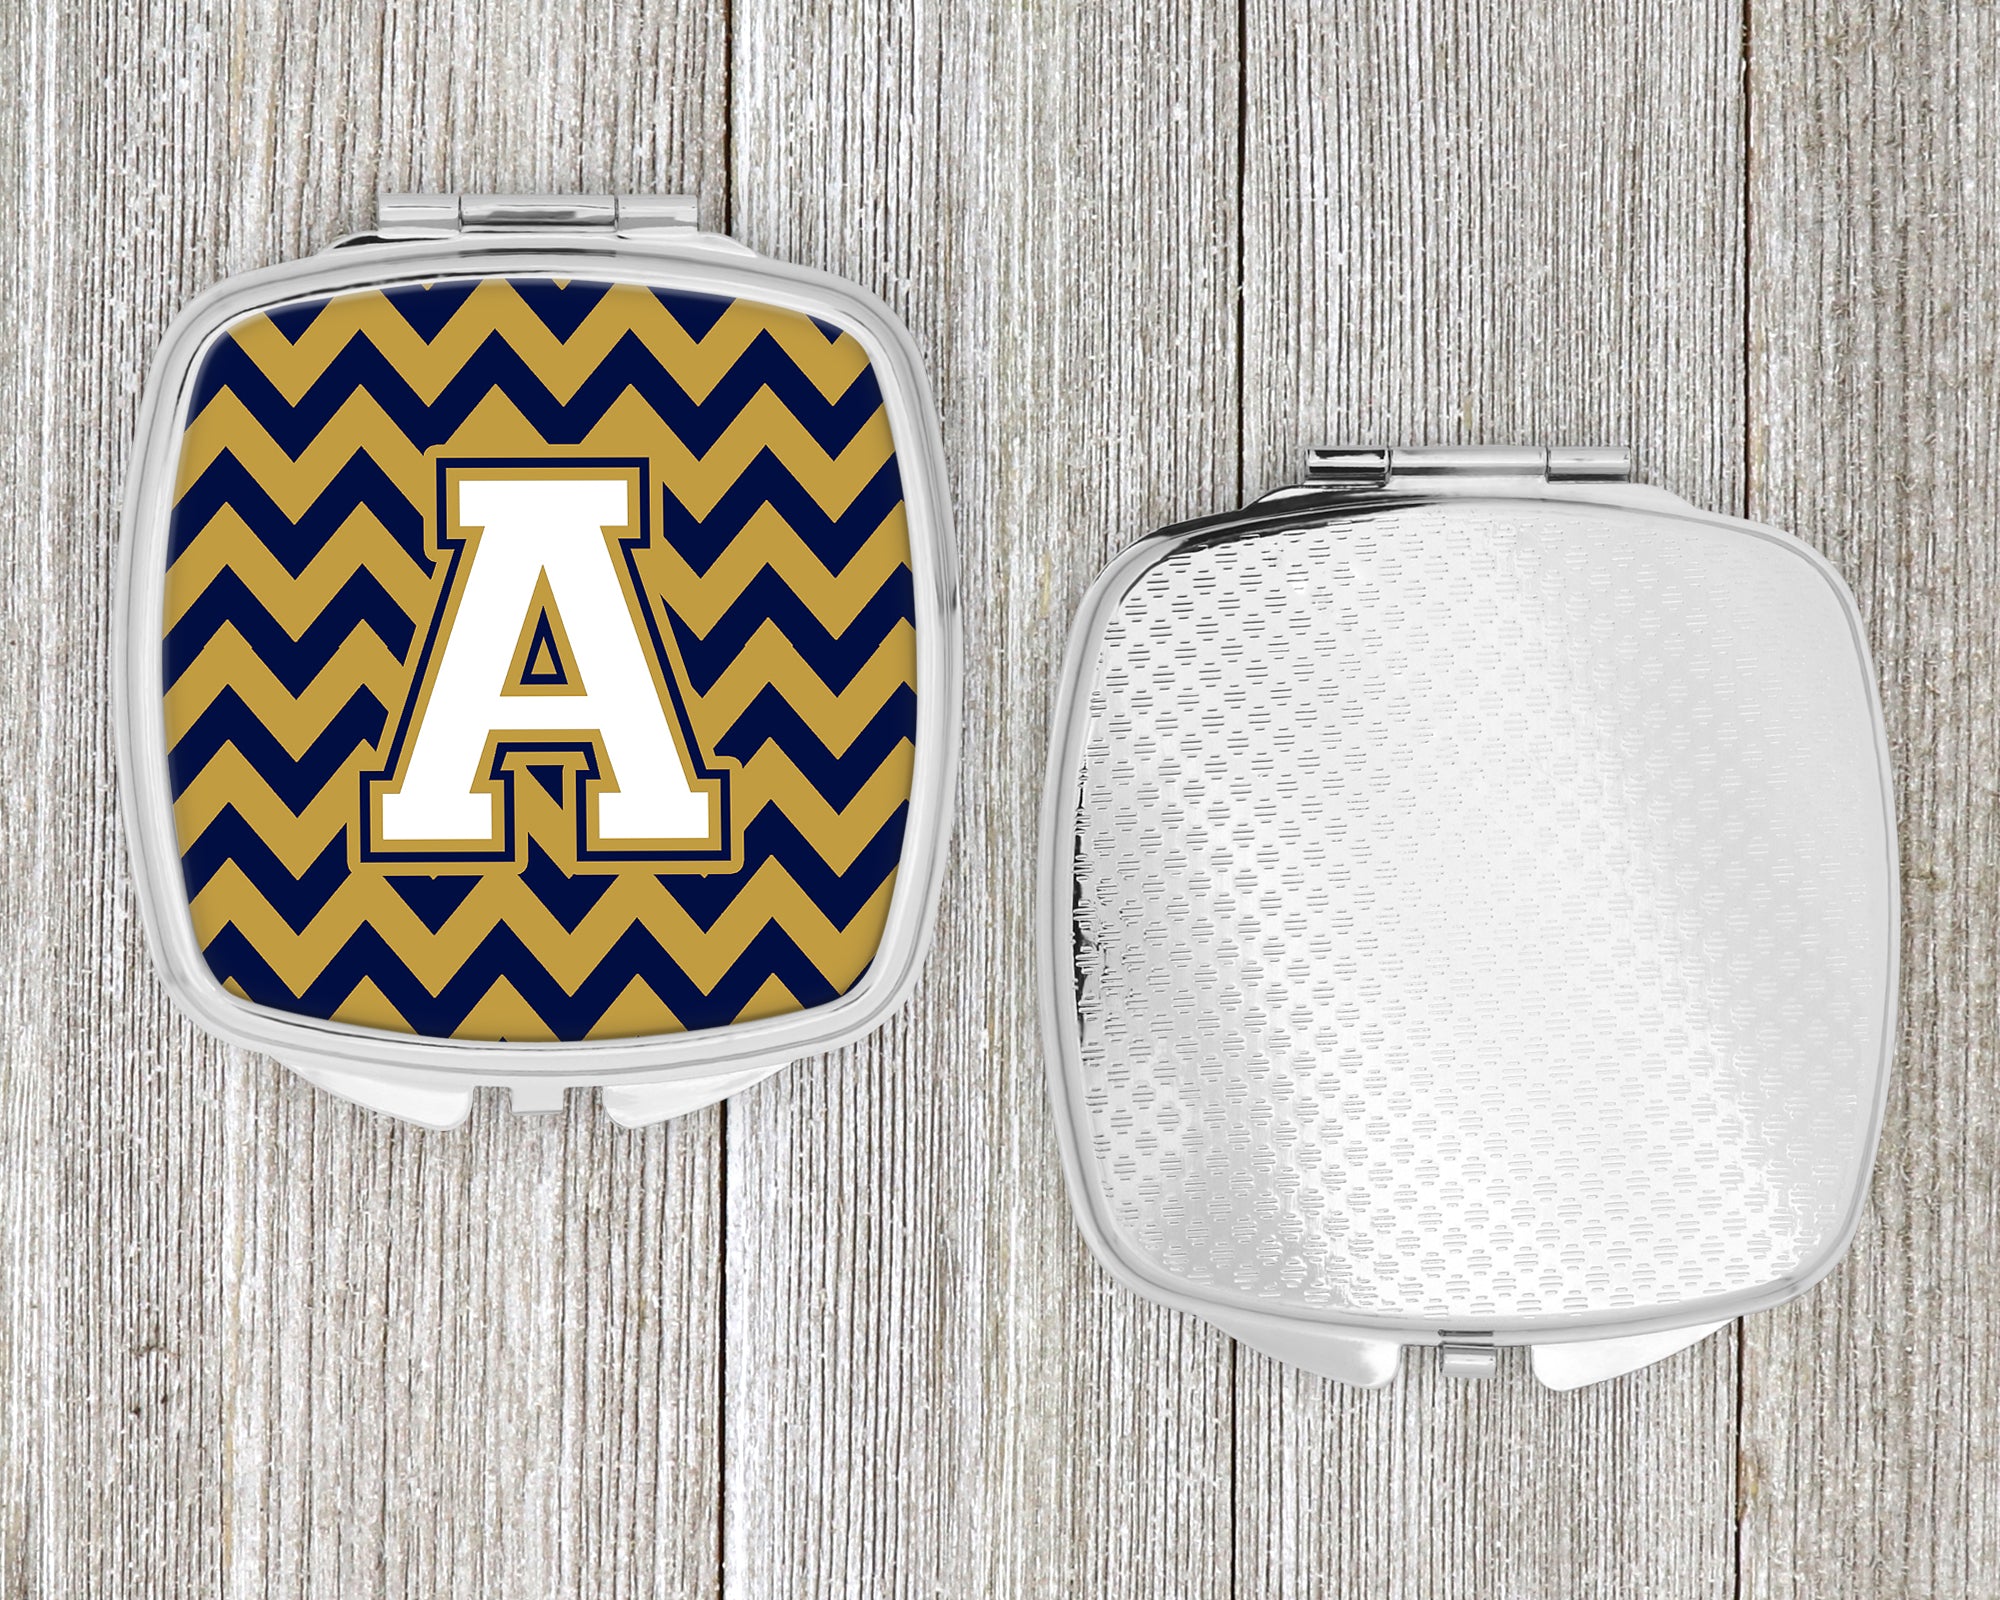 Letter A Chevron Navy Blue and Gold Compact Mirror CJ1057-ASCM  the-store.com.